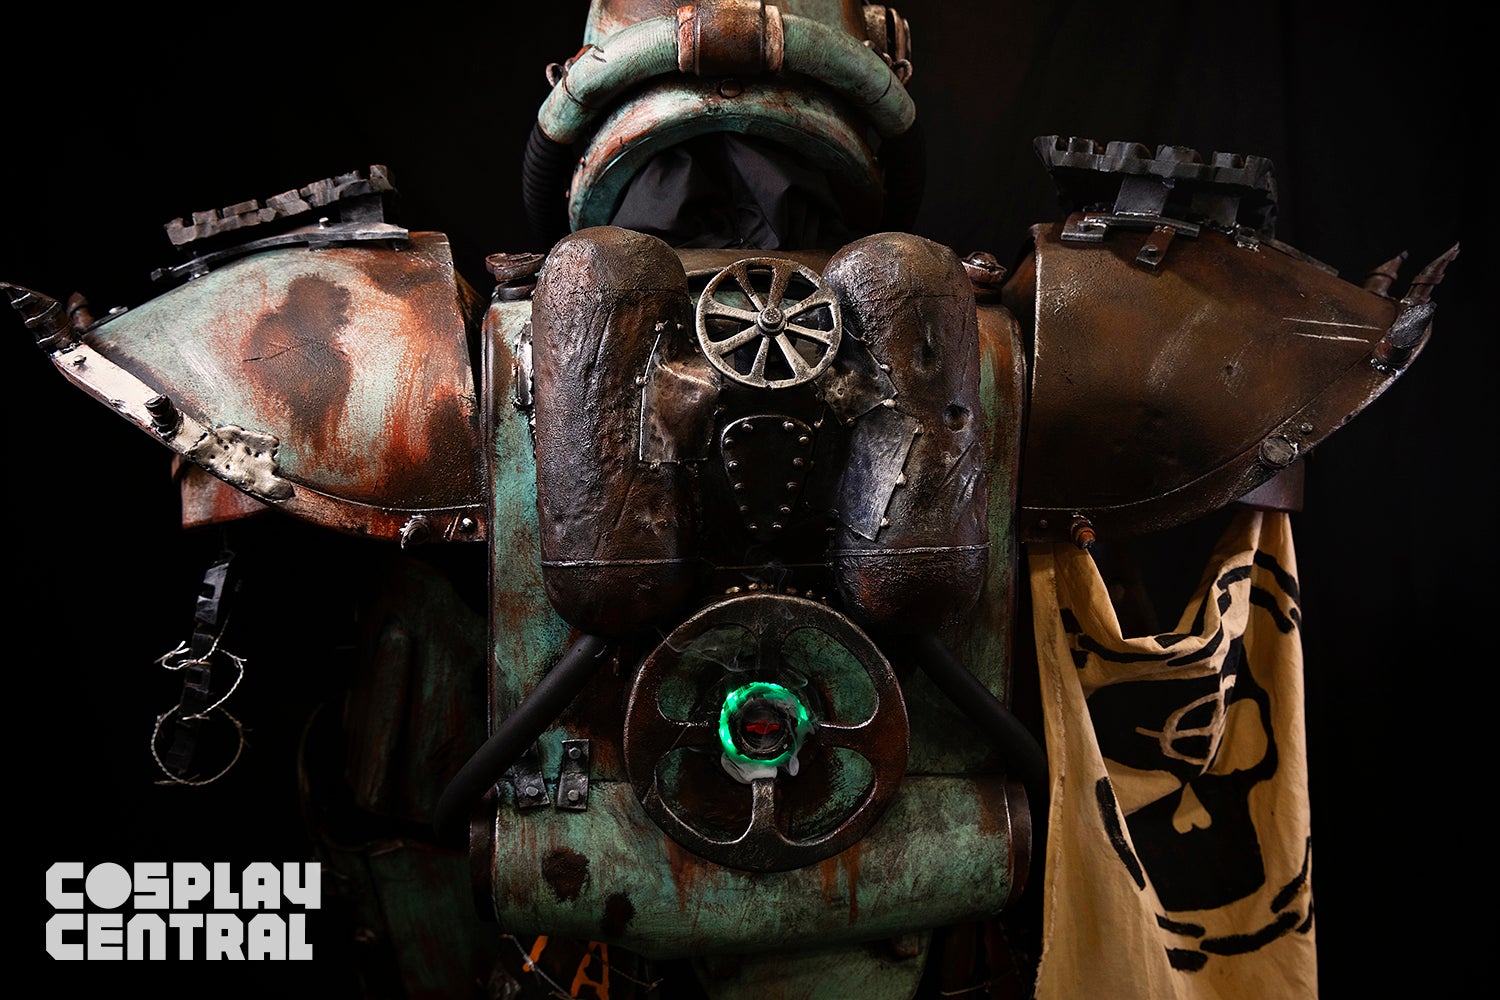 Cosplayer Well Rusted Workshop displays his T-51 Power Armor from Borderlands.